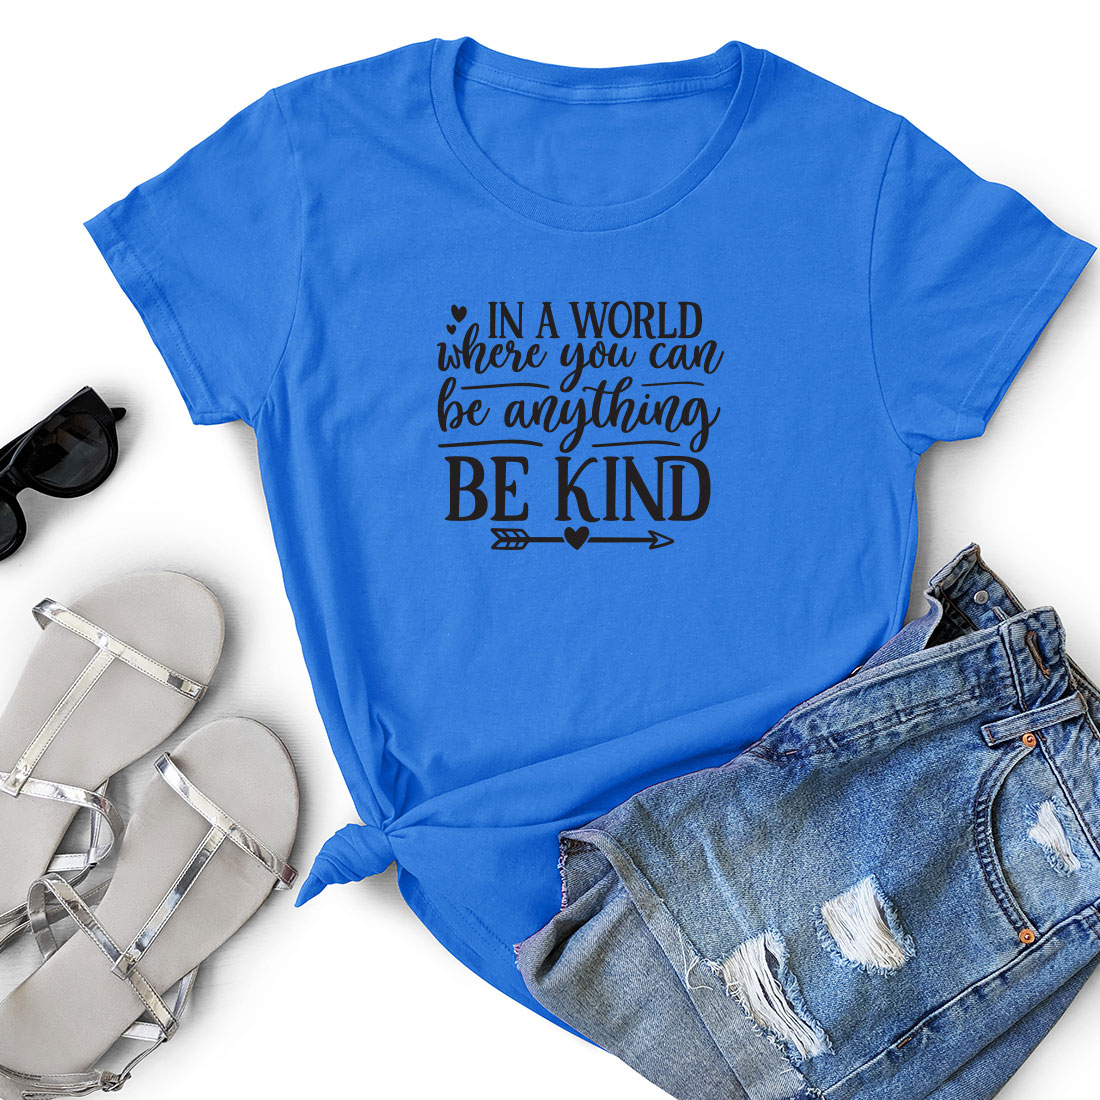 T - shirt that says in a world where you can be anything be kind.